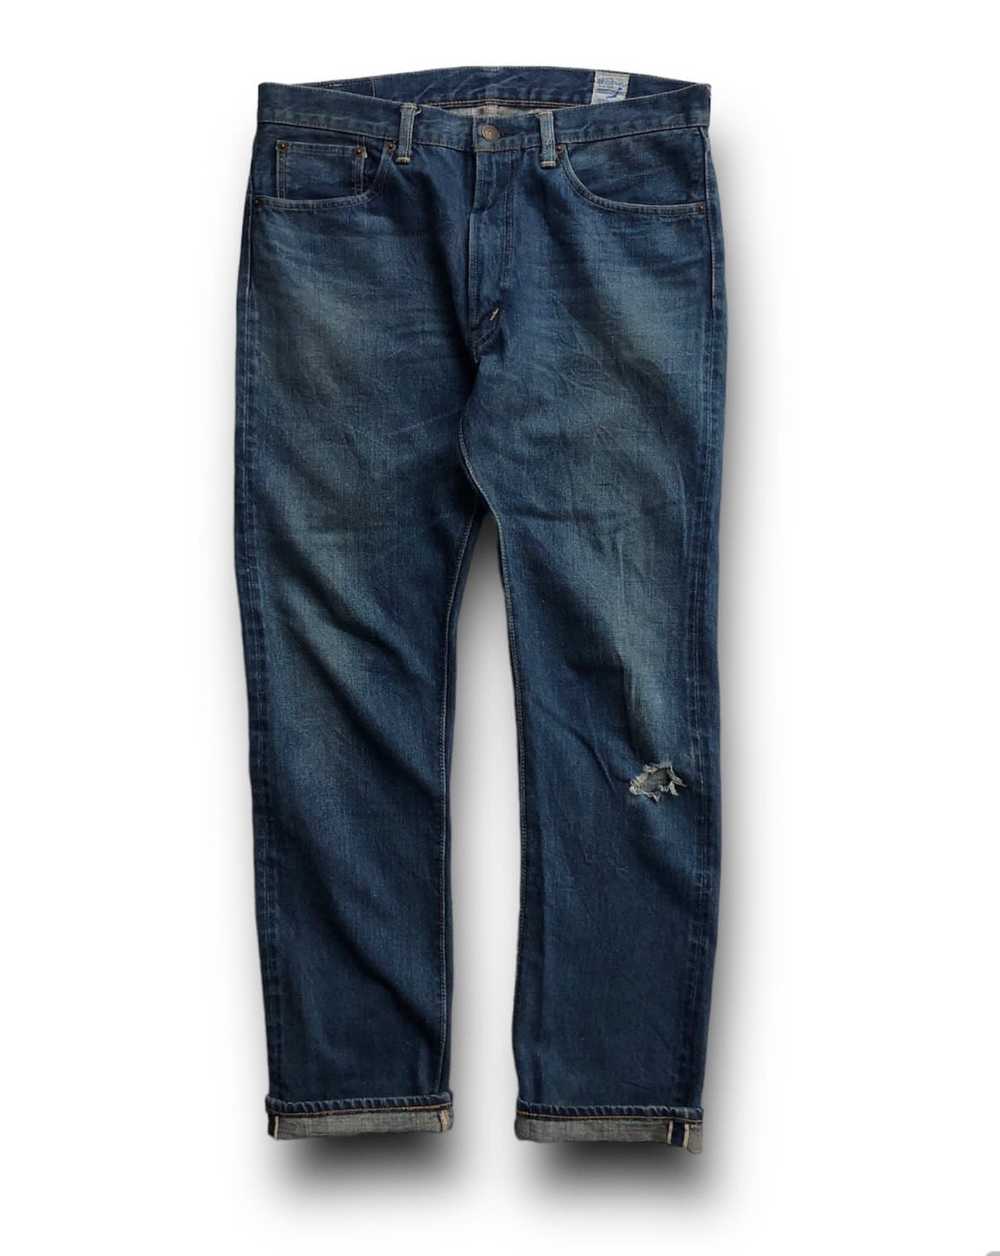 Japanese Brand × Orslow Orslow jeans selvedge - image 2